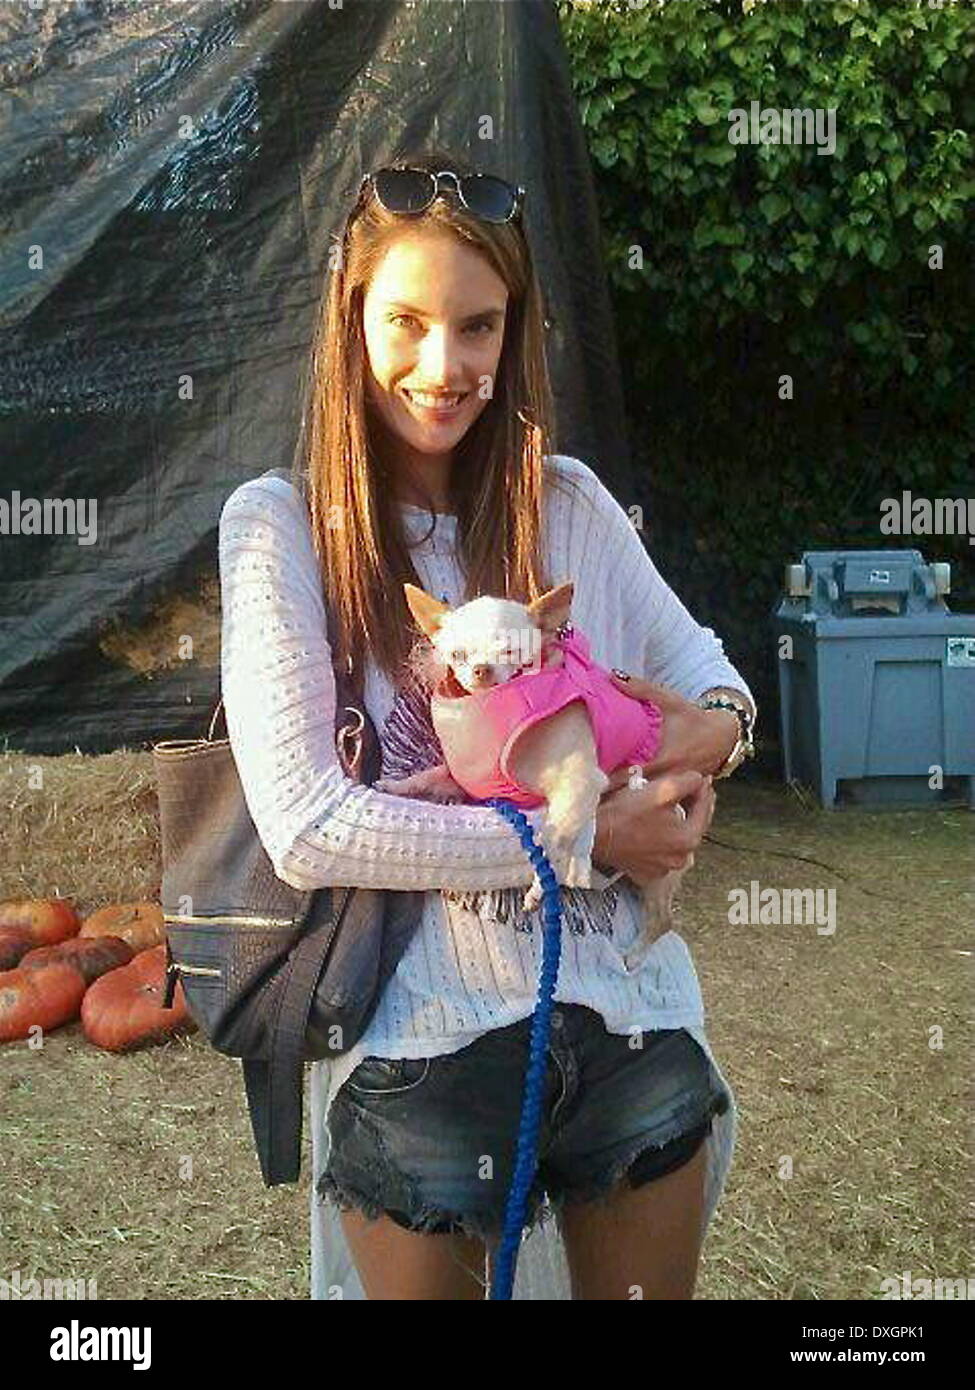 Alessandra Ambrosio is holding a rescue dog named Bubbles who was close to death when One Dog Rescue, a non-profit animal rescue group in Los Angeles, saved her life. Alessandra left a 100 dollar bill in the rescue's donation jar. Los Angeles, California - 23.10.12 When: 23 Oct 2012 Stock Photo